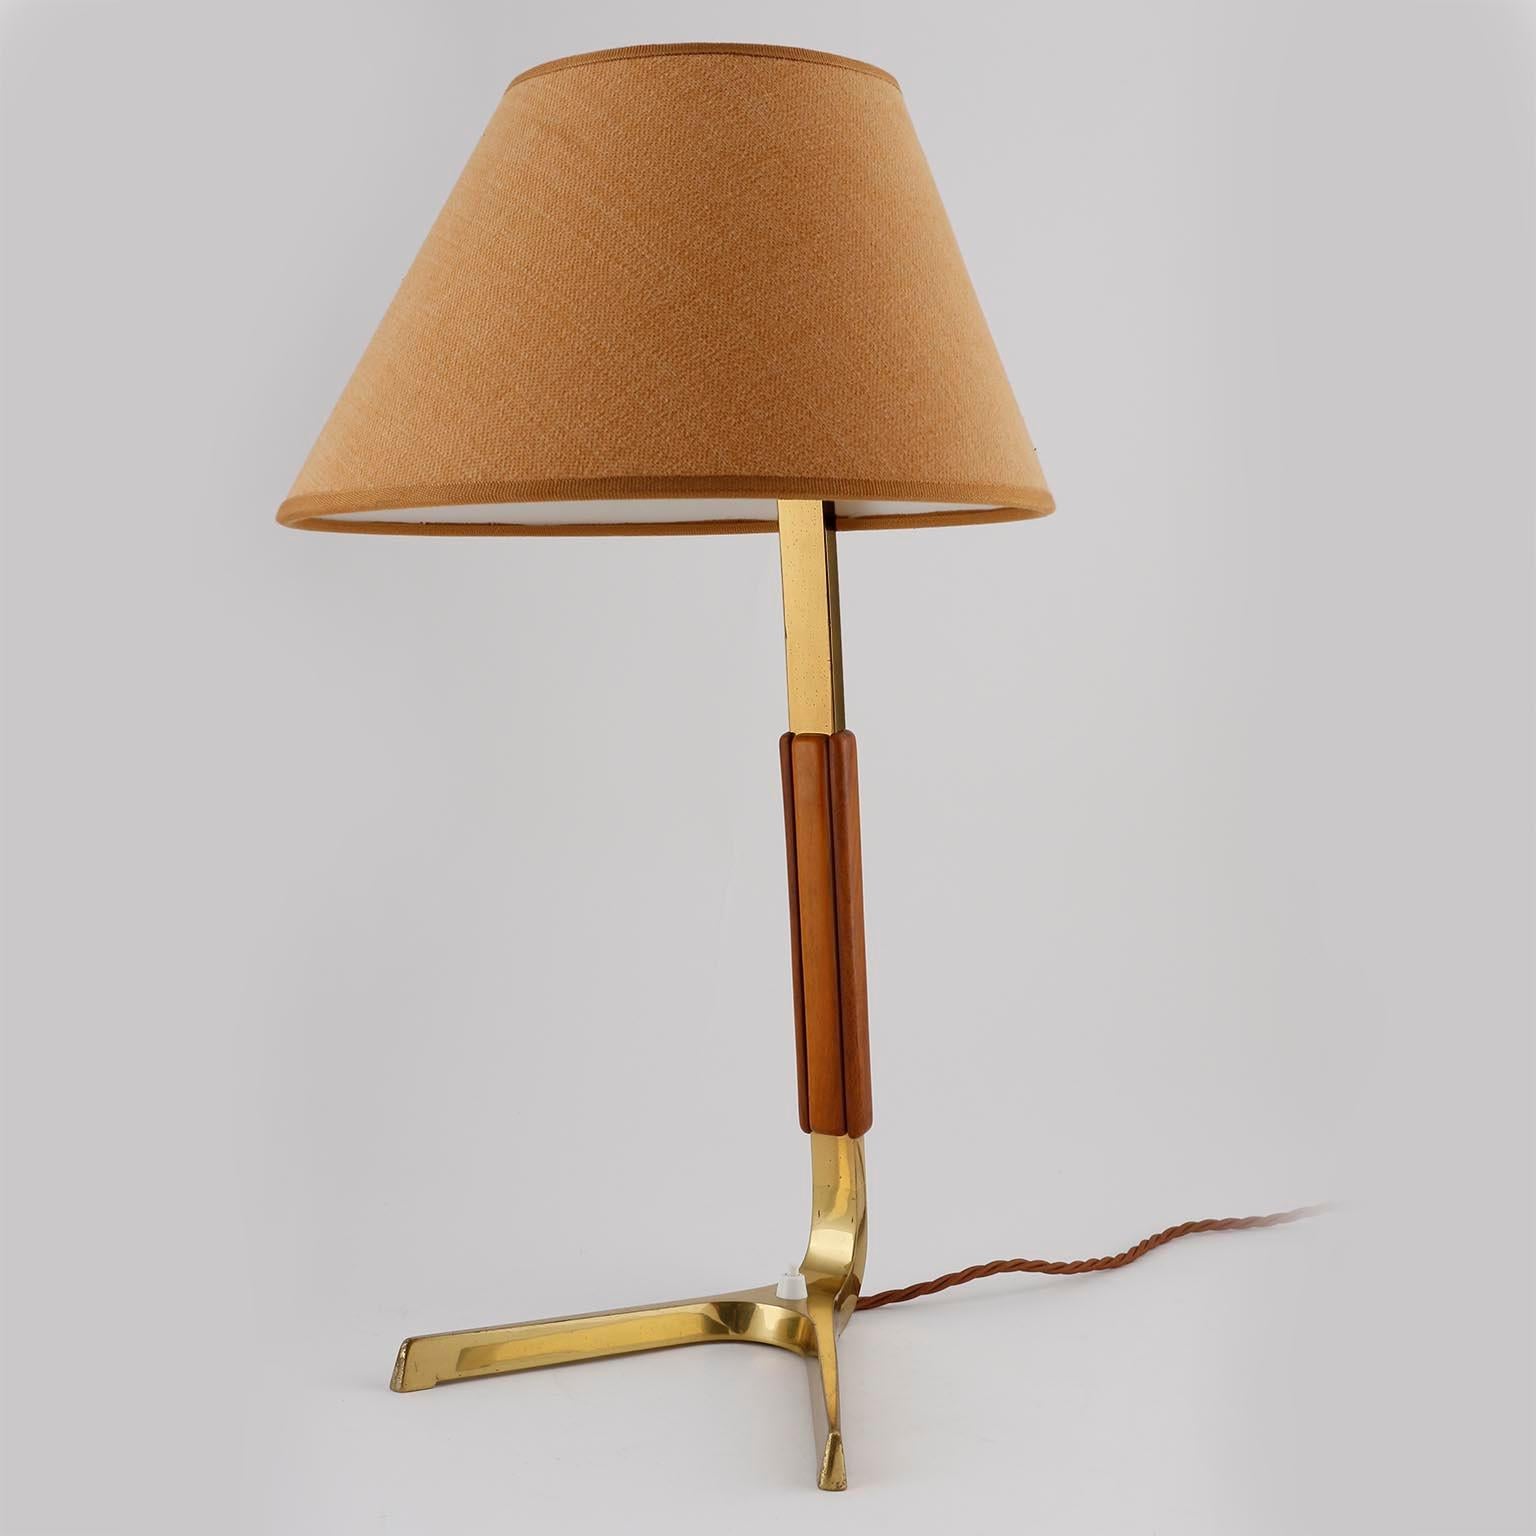 A gorgeous and rare table lamp model 'Phönix' (engl. 'Phoenix') no. 1197 by J.T. Kalmar, Vienna, manufactured in midcentury, circa 1960 (late 1950s or 1960s).
The light is documented in the Kalmar catalogue from 1953 as well as 1960.
It is made of a